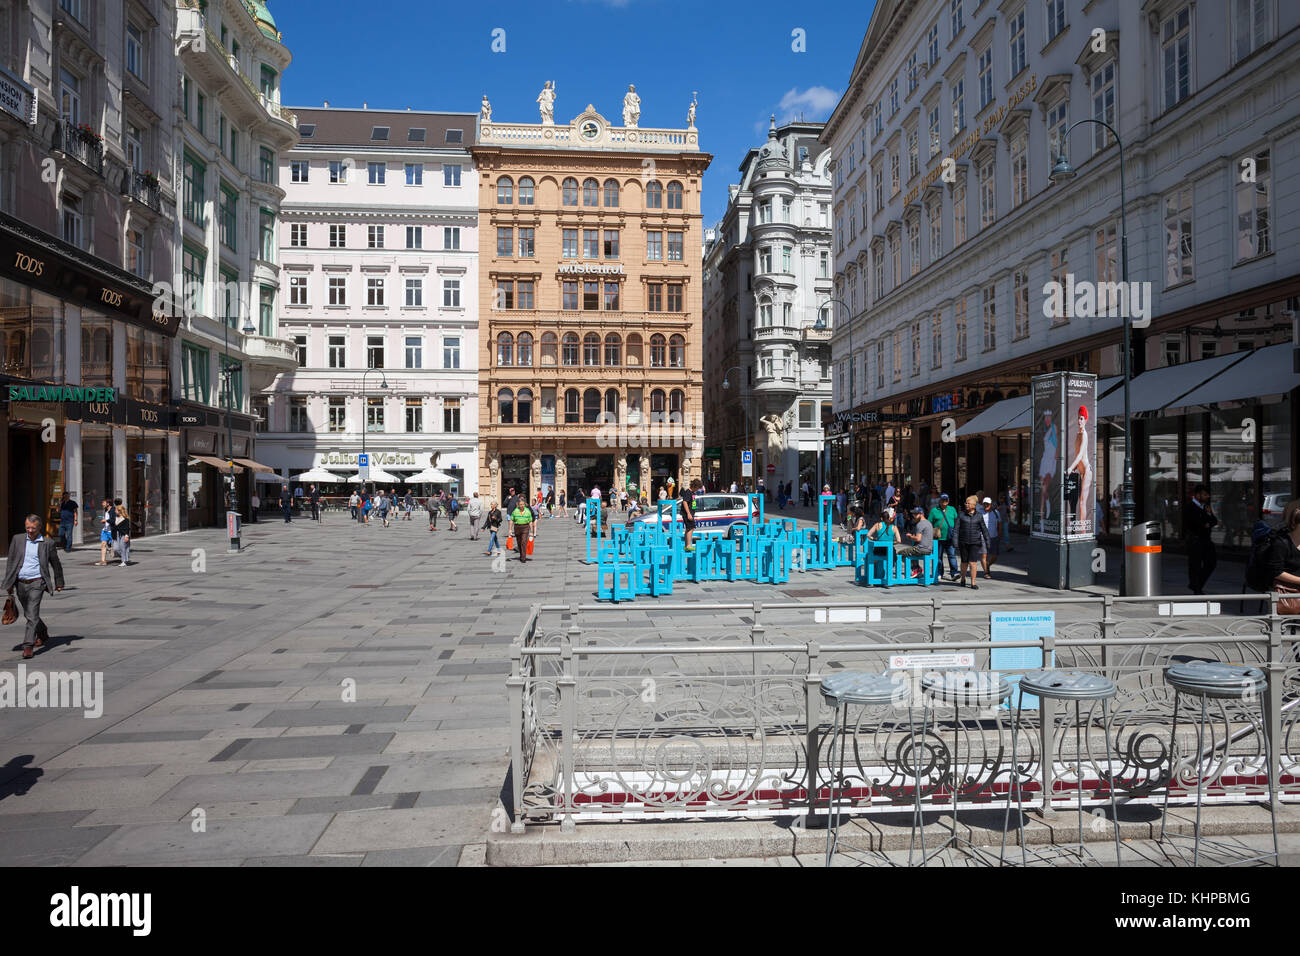 Graben street in city of Vienna, Austria, famous pedestrianized shopping street in the city centre, first district Stock Photo